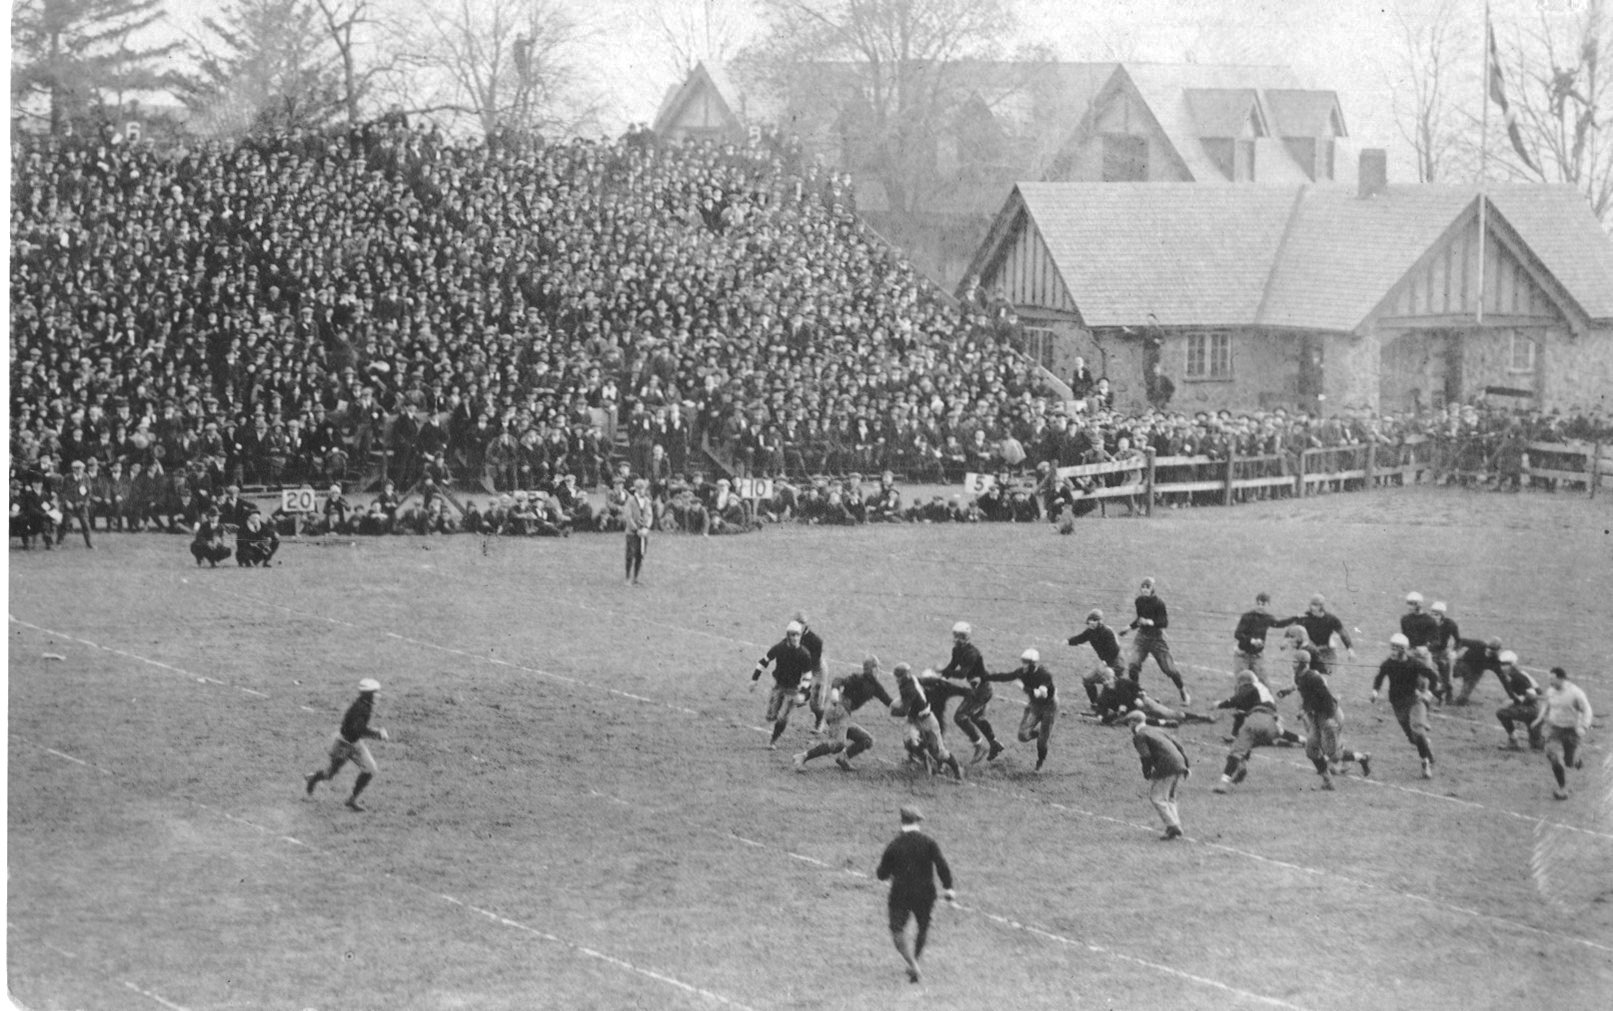 The Oldest Rivalry In College Football Endures 133 Years